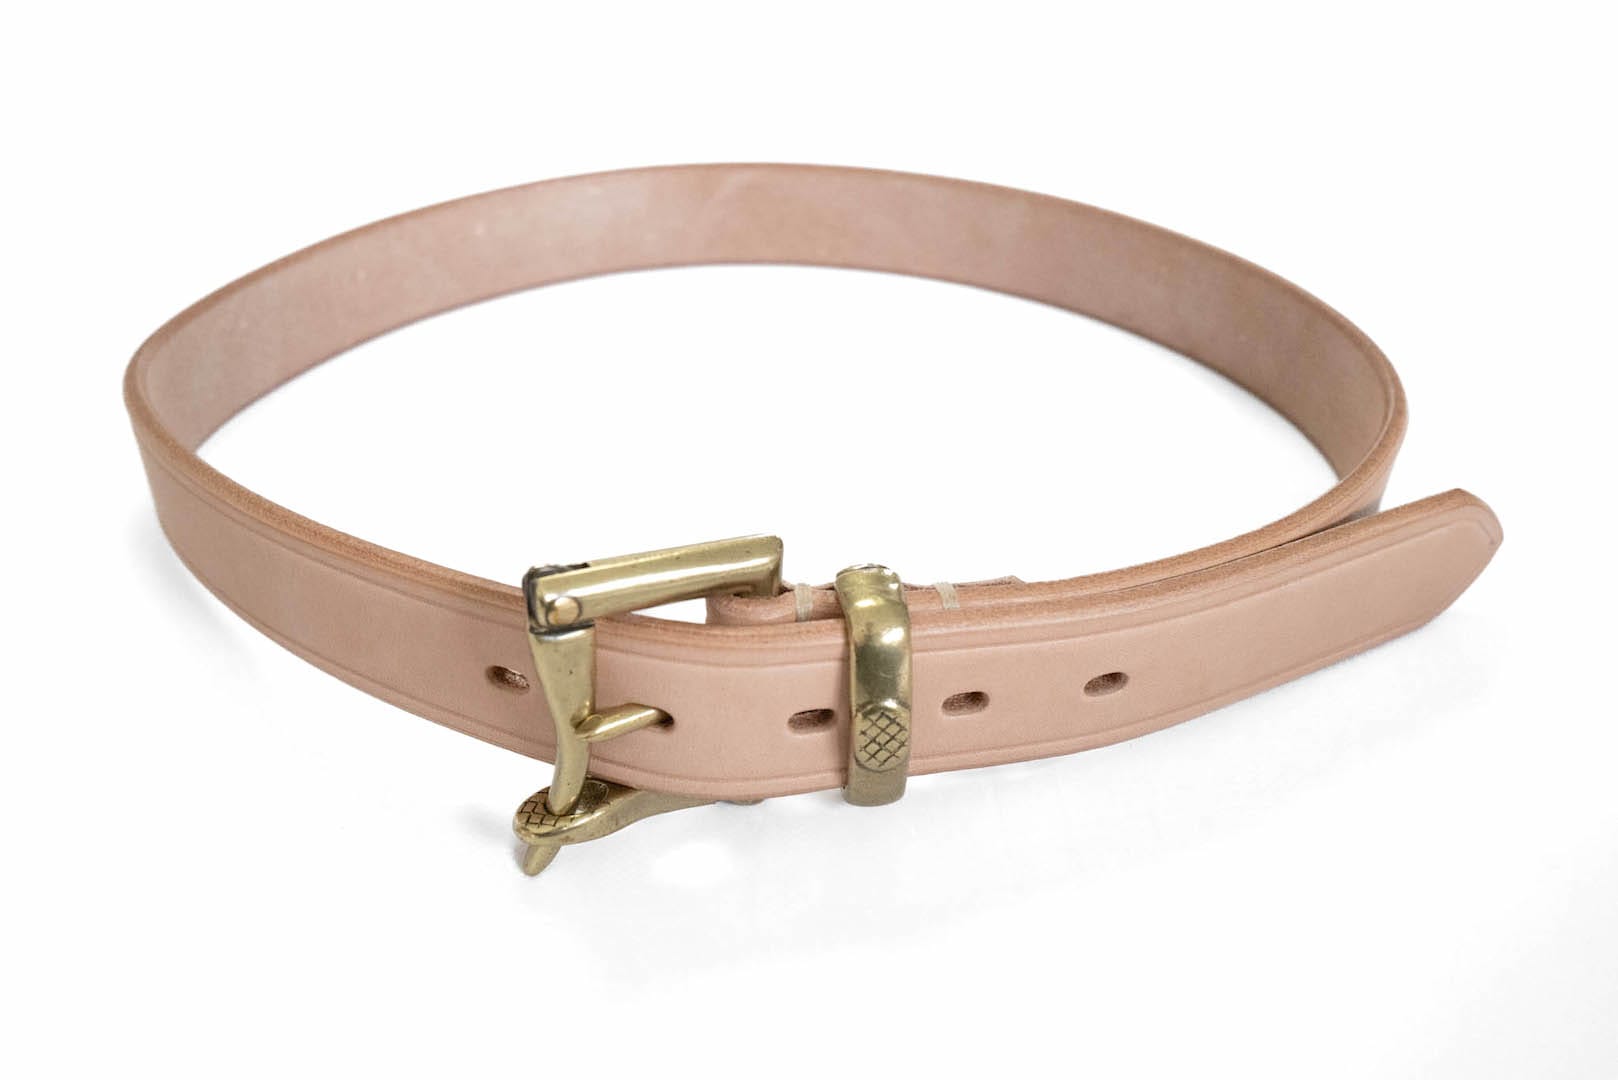 Inception by Accel Company Fireman Buckle Saddle Leather Belt (Natural)